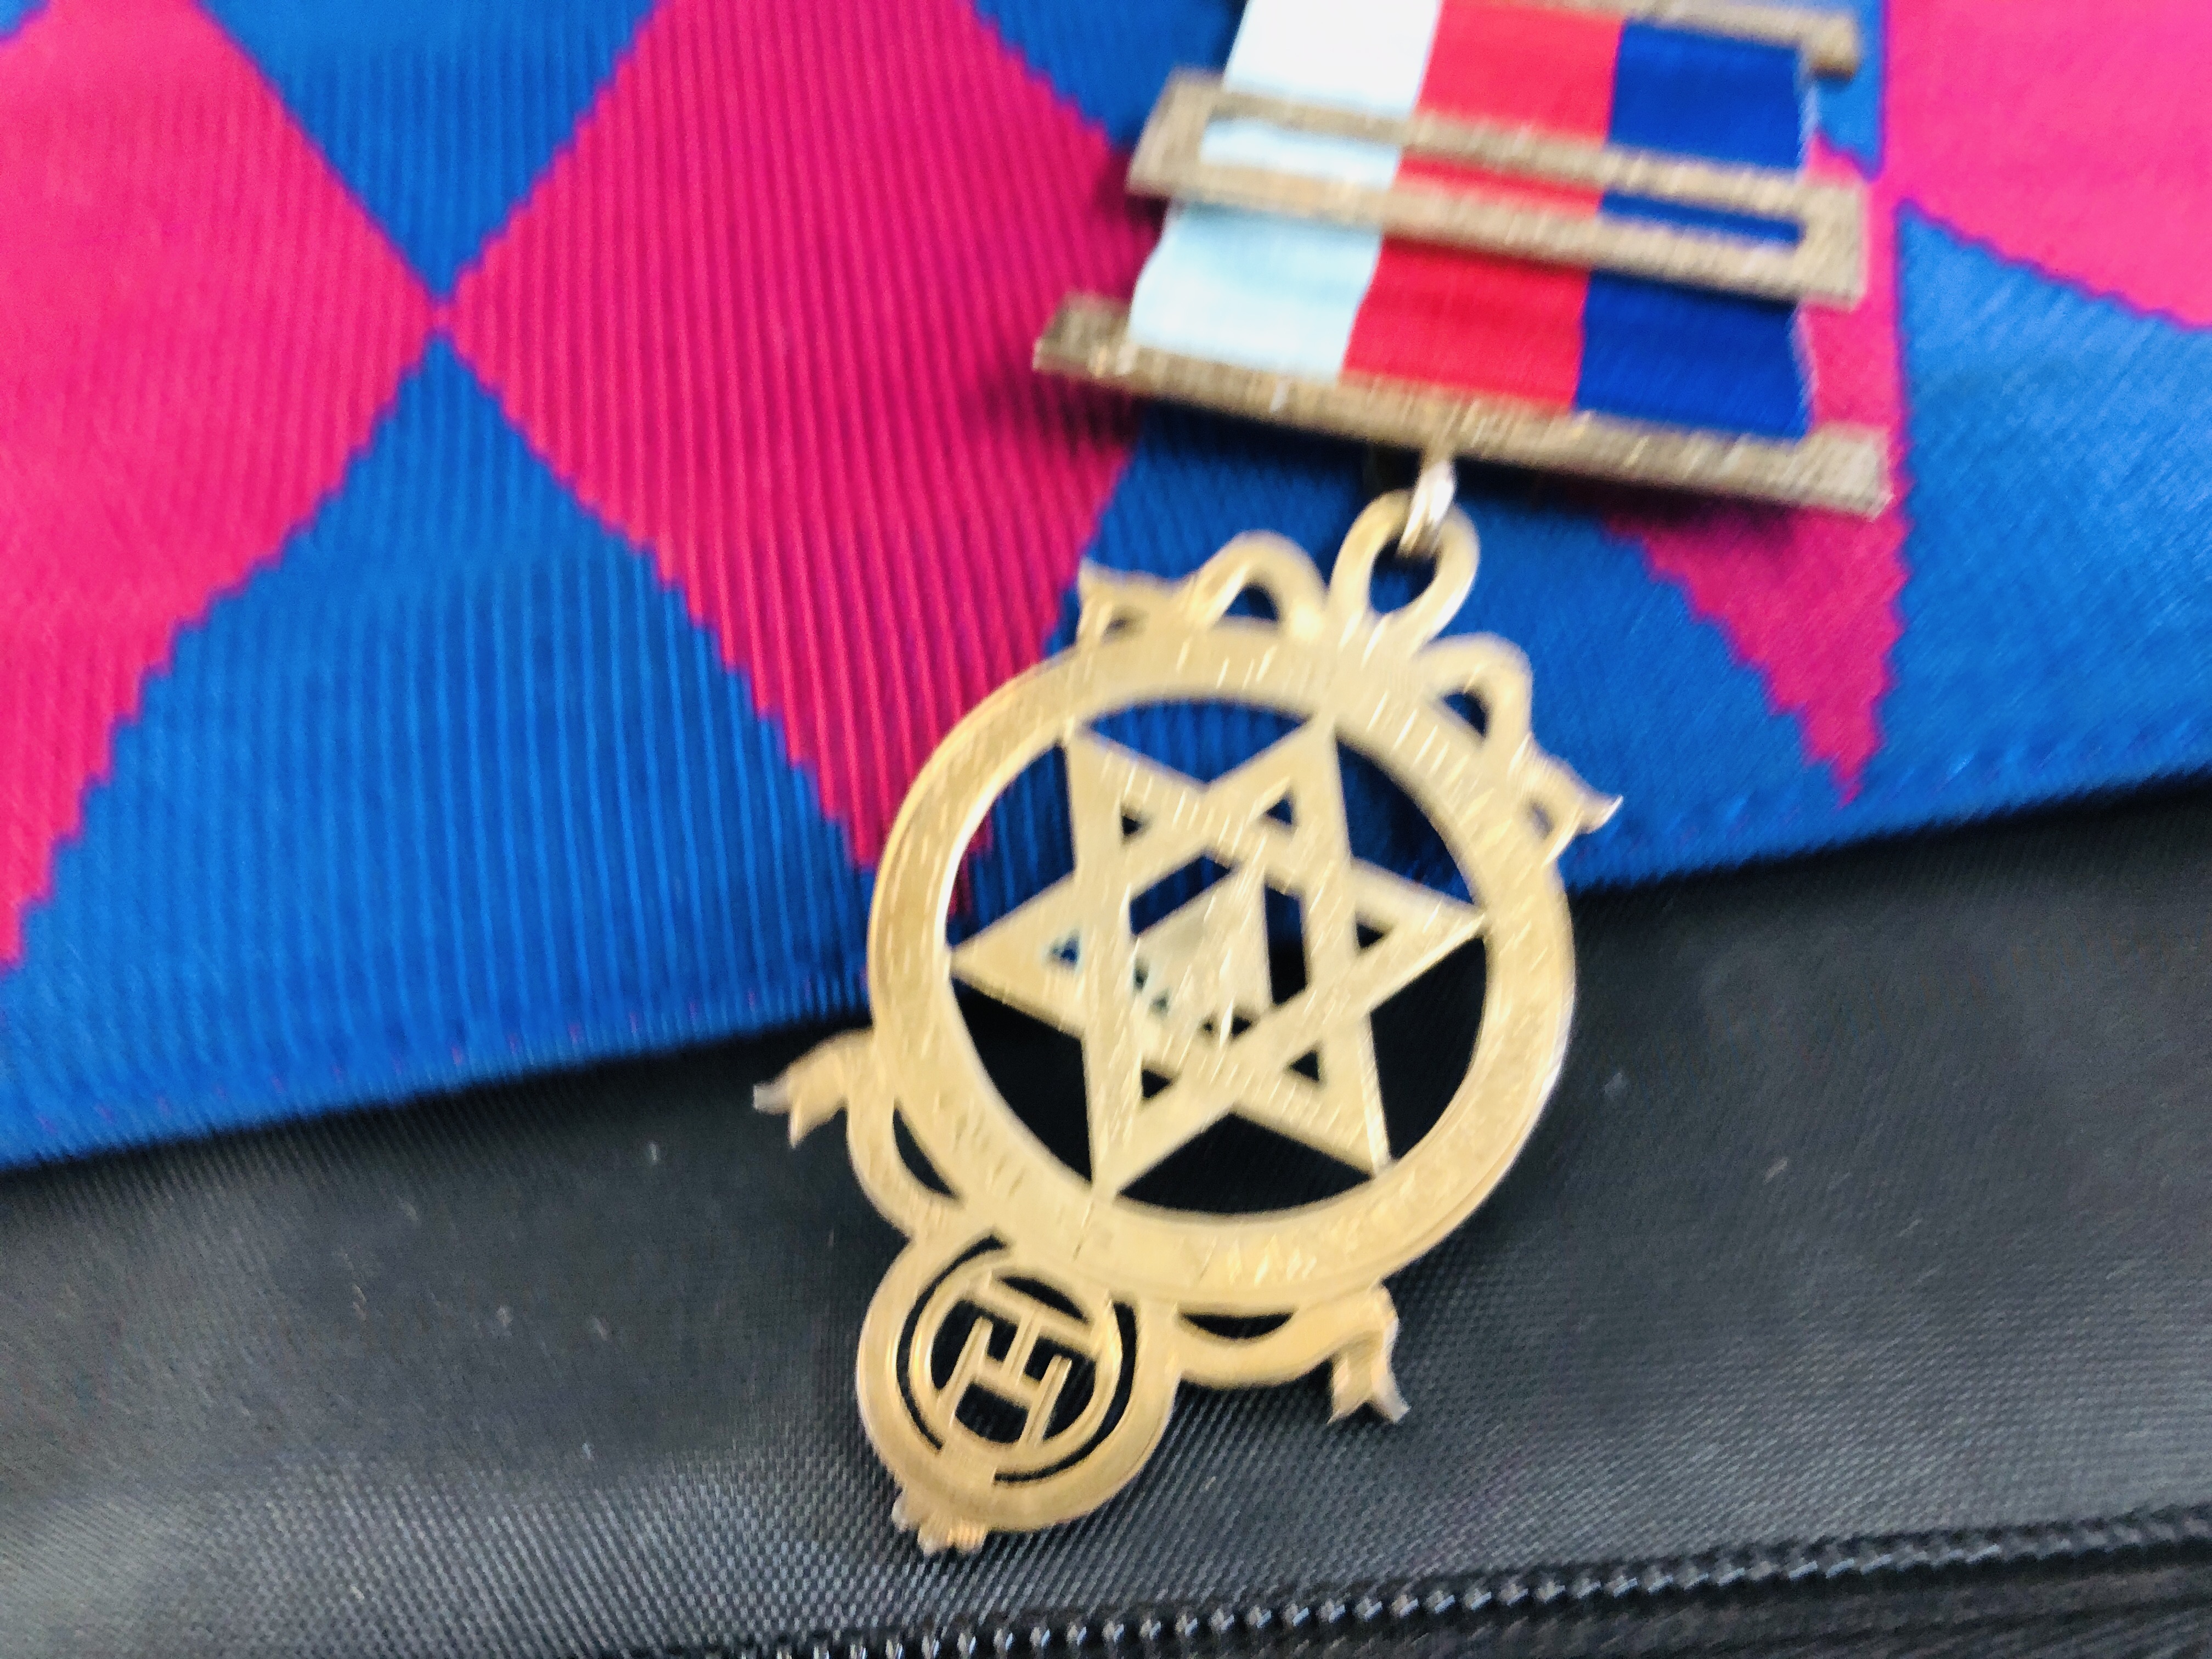 A GROUP OF SUPREME GRAND CHAPTER MASONIC REGALIA IN CARRY CASE. - Image 7 of 8